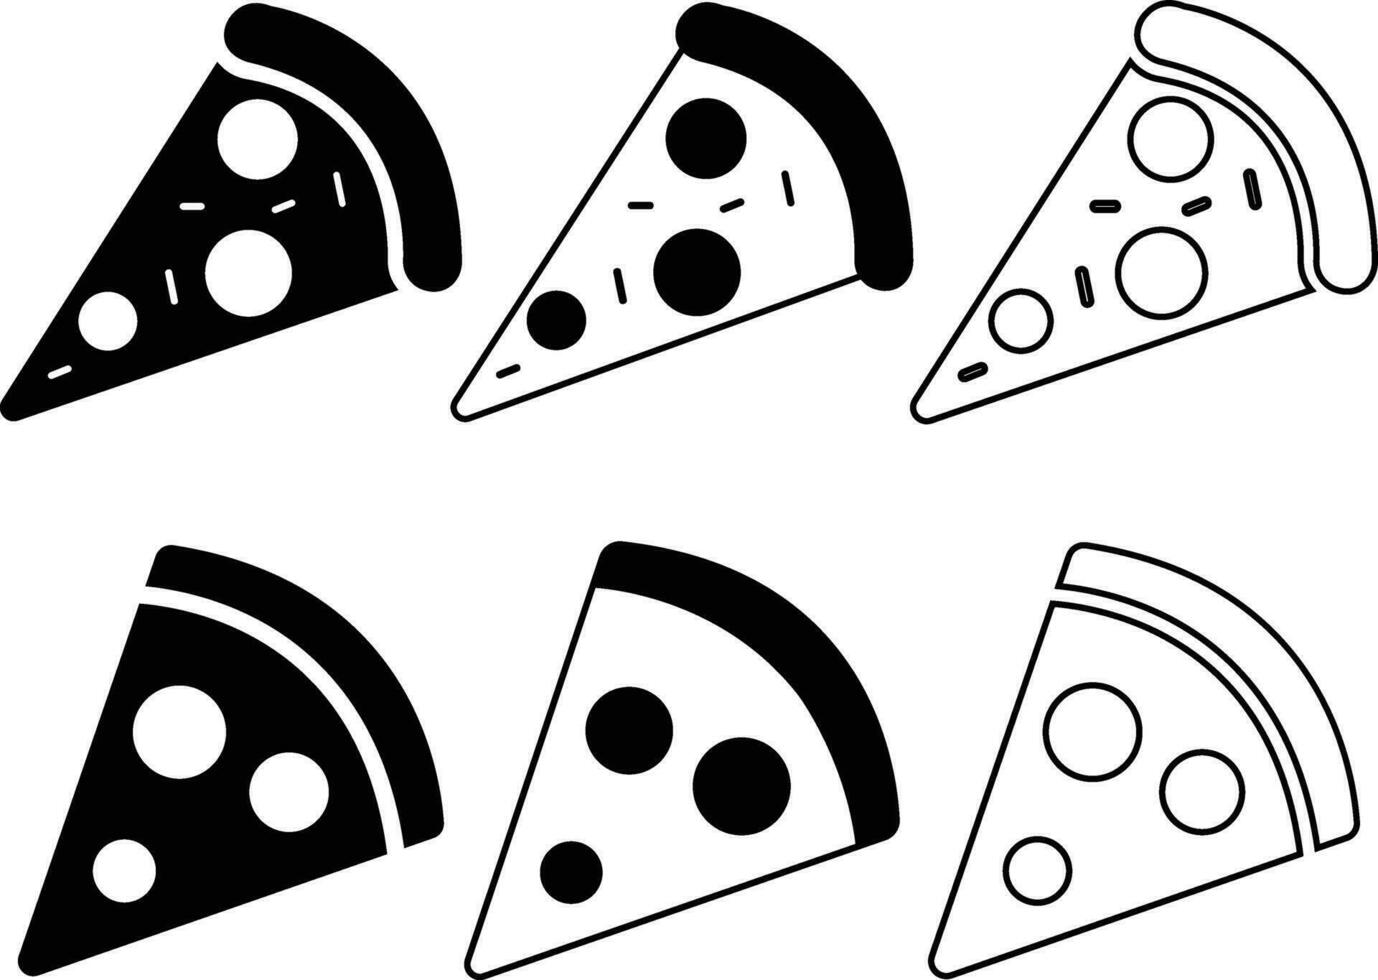 Pizza piece flat line black icons set. Vector thin sign of italian fast food cafe logo. Pizzeria can be used for digital product, presentation, print design and more